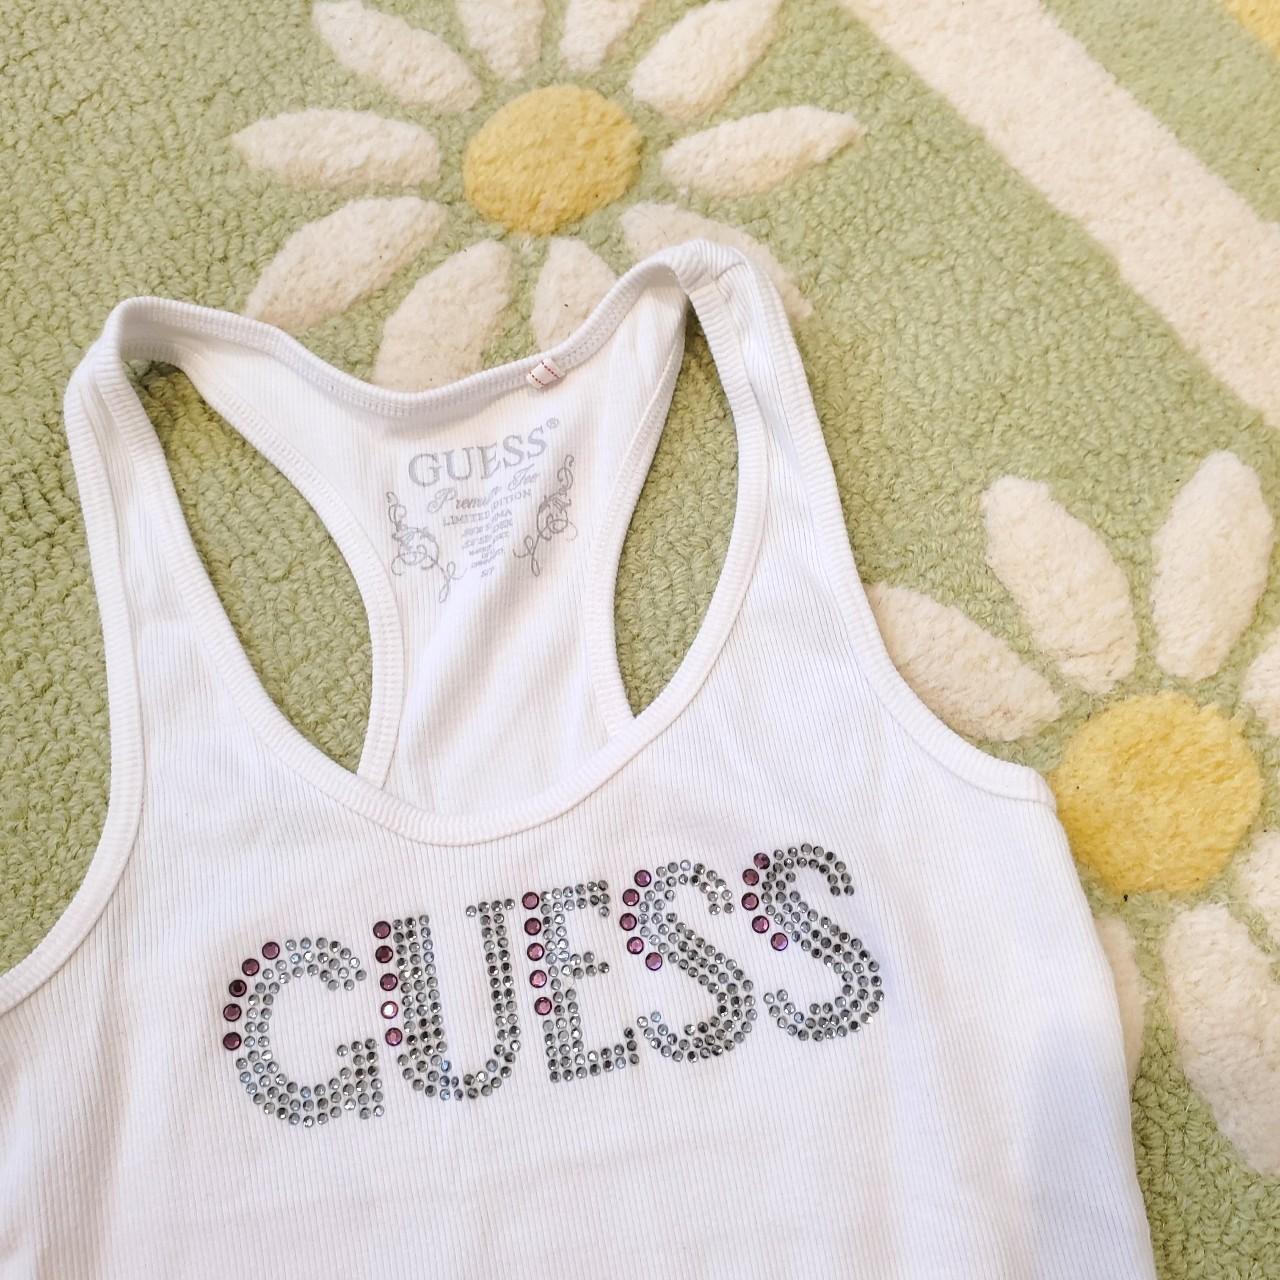 Guess Women's White and Pink Vest (2)